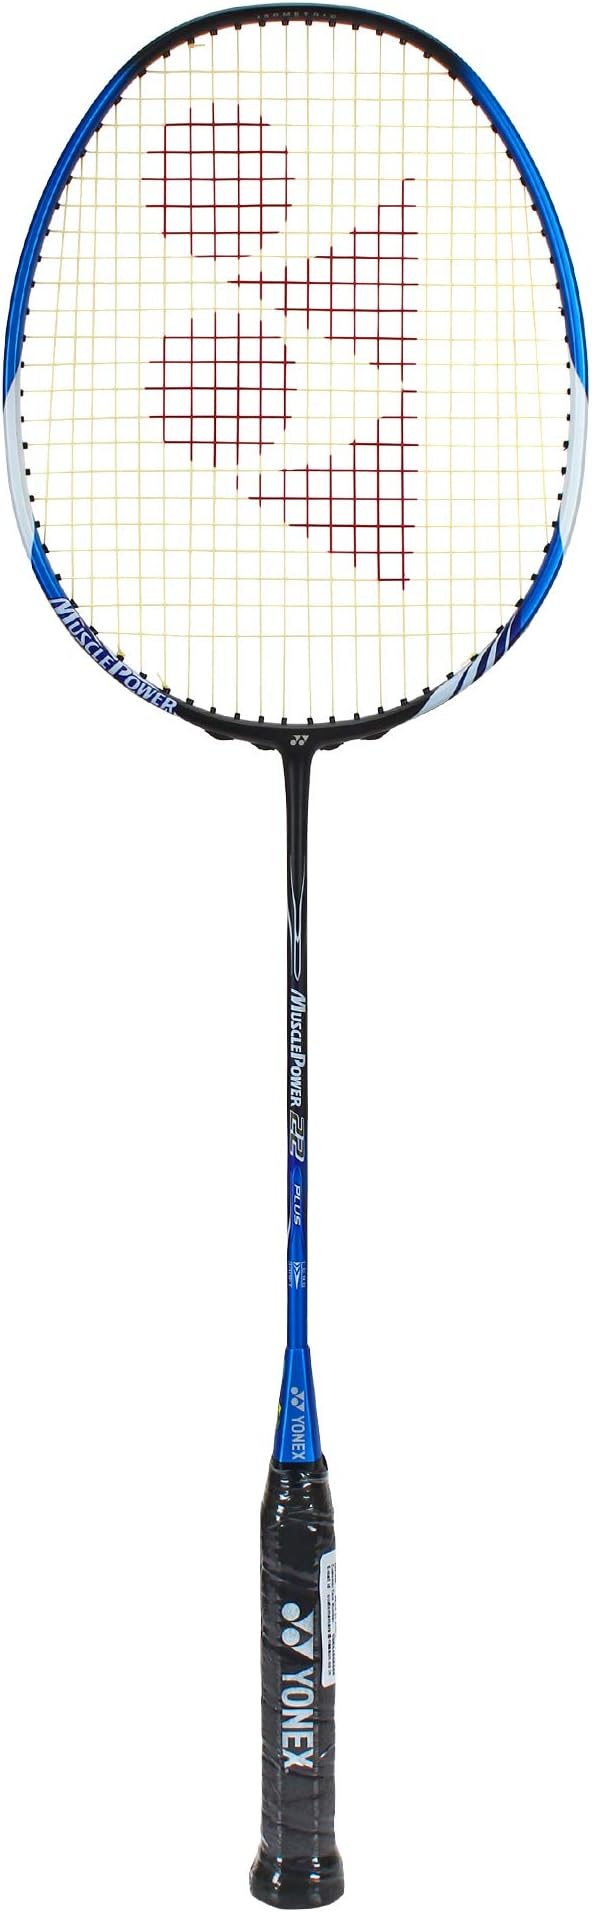 yonex badminton racket muscle power series with full cover high tension pre strung racquets 3 3/4 inches 